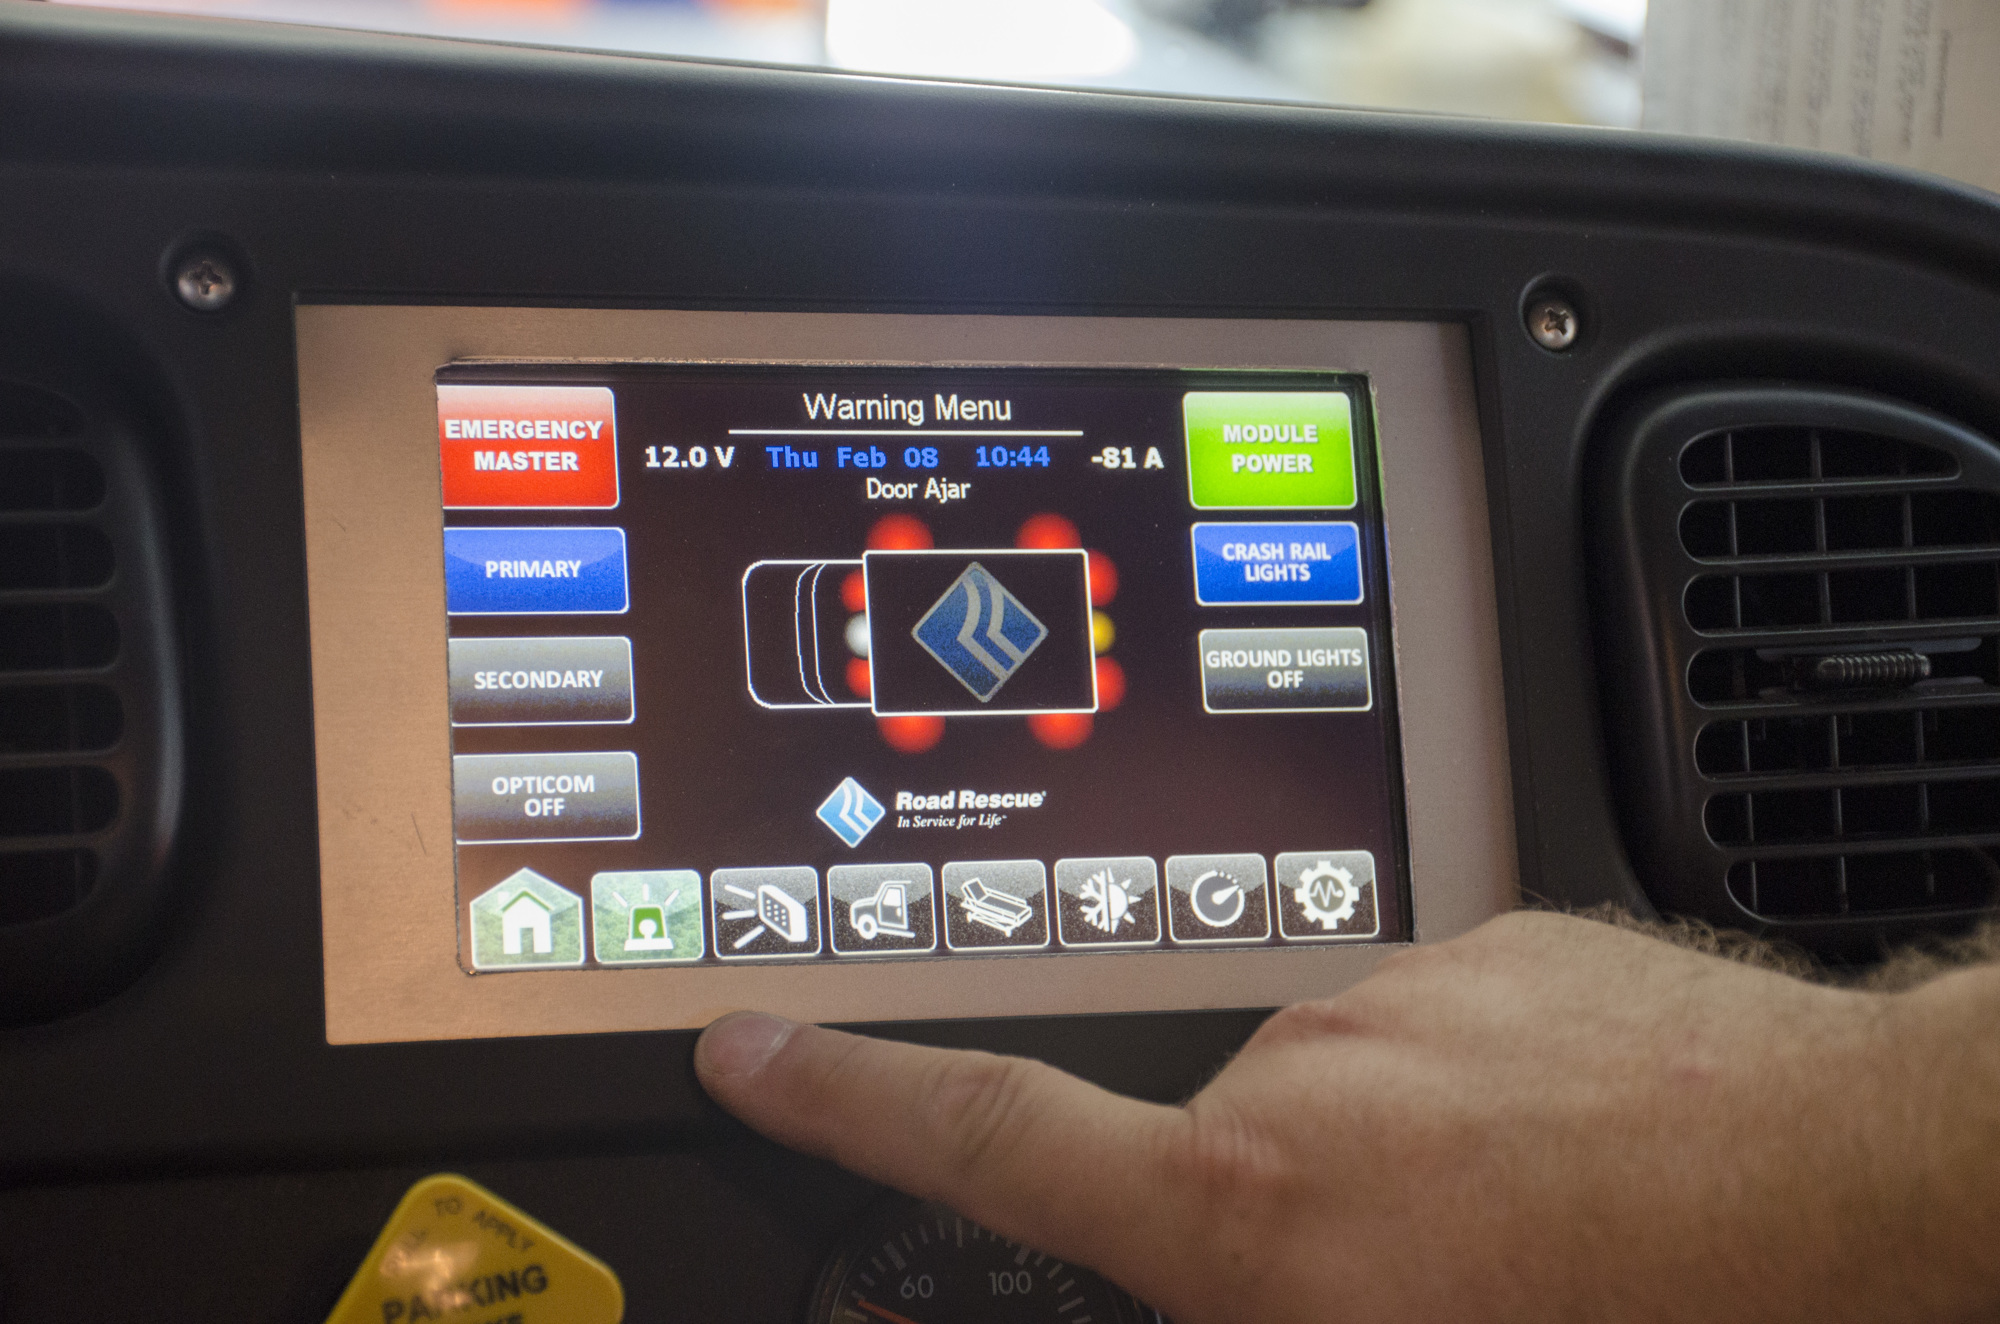 This touch screen gives paramedics the ability to see what emergency lights are operating, control the howler siren, check which doors are open, monitor the vehicles oxygen levels and battery life, see blind spots and much more.